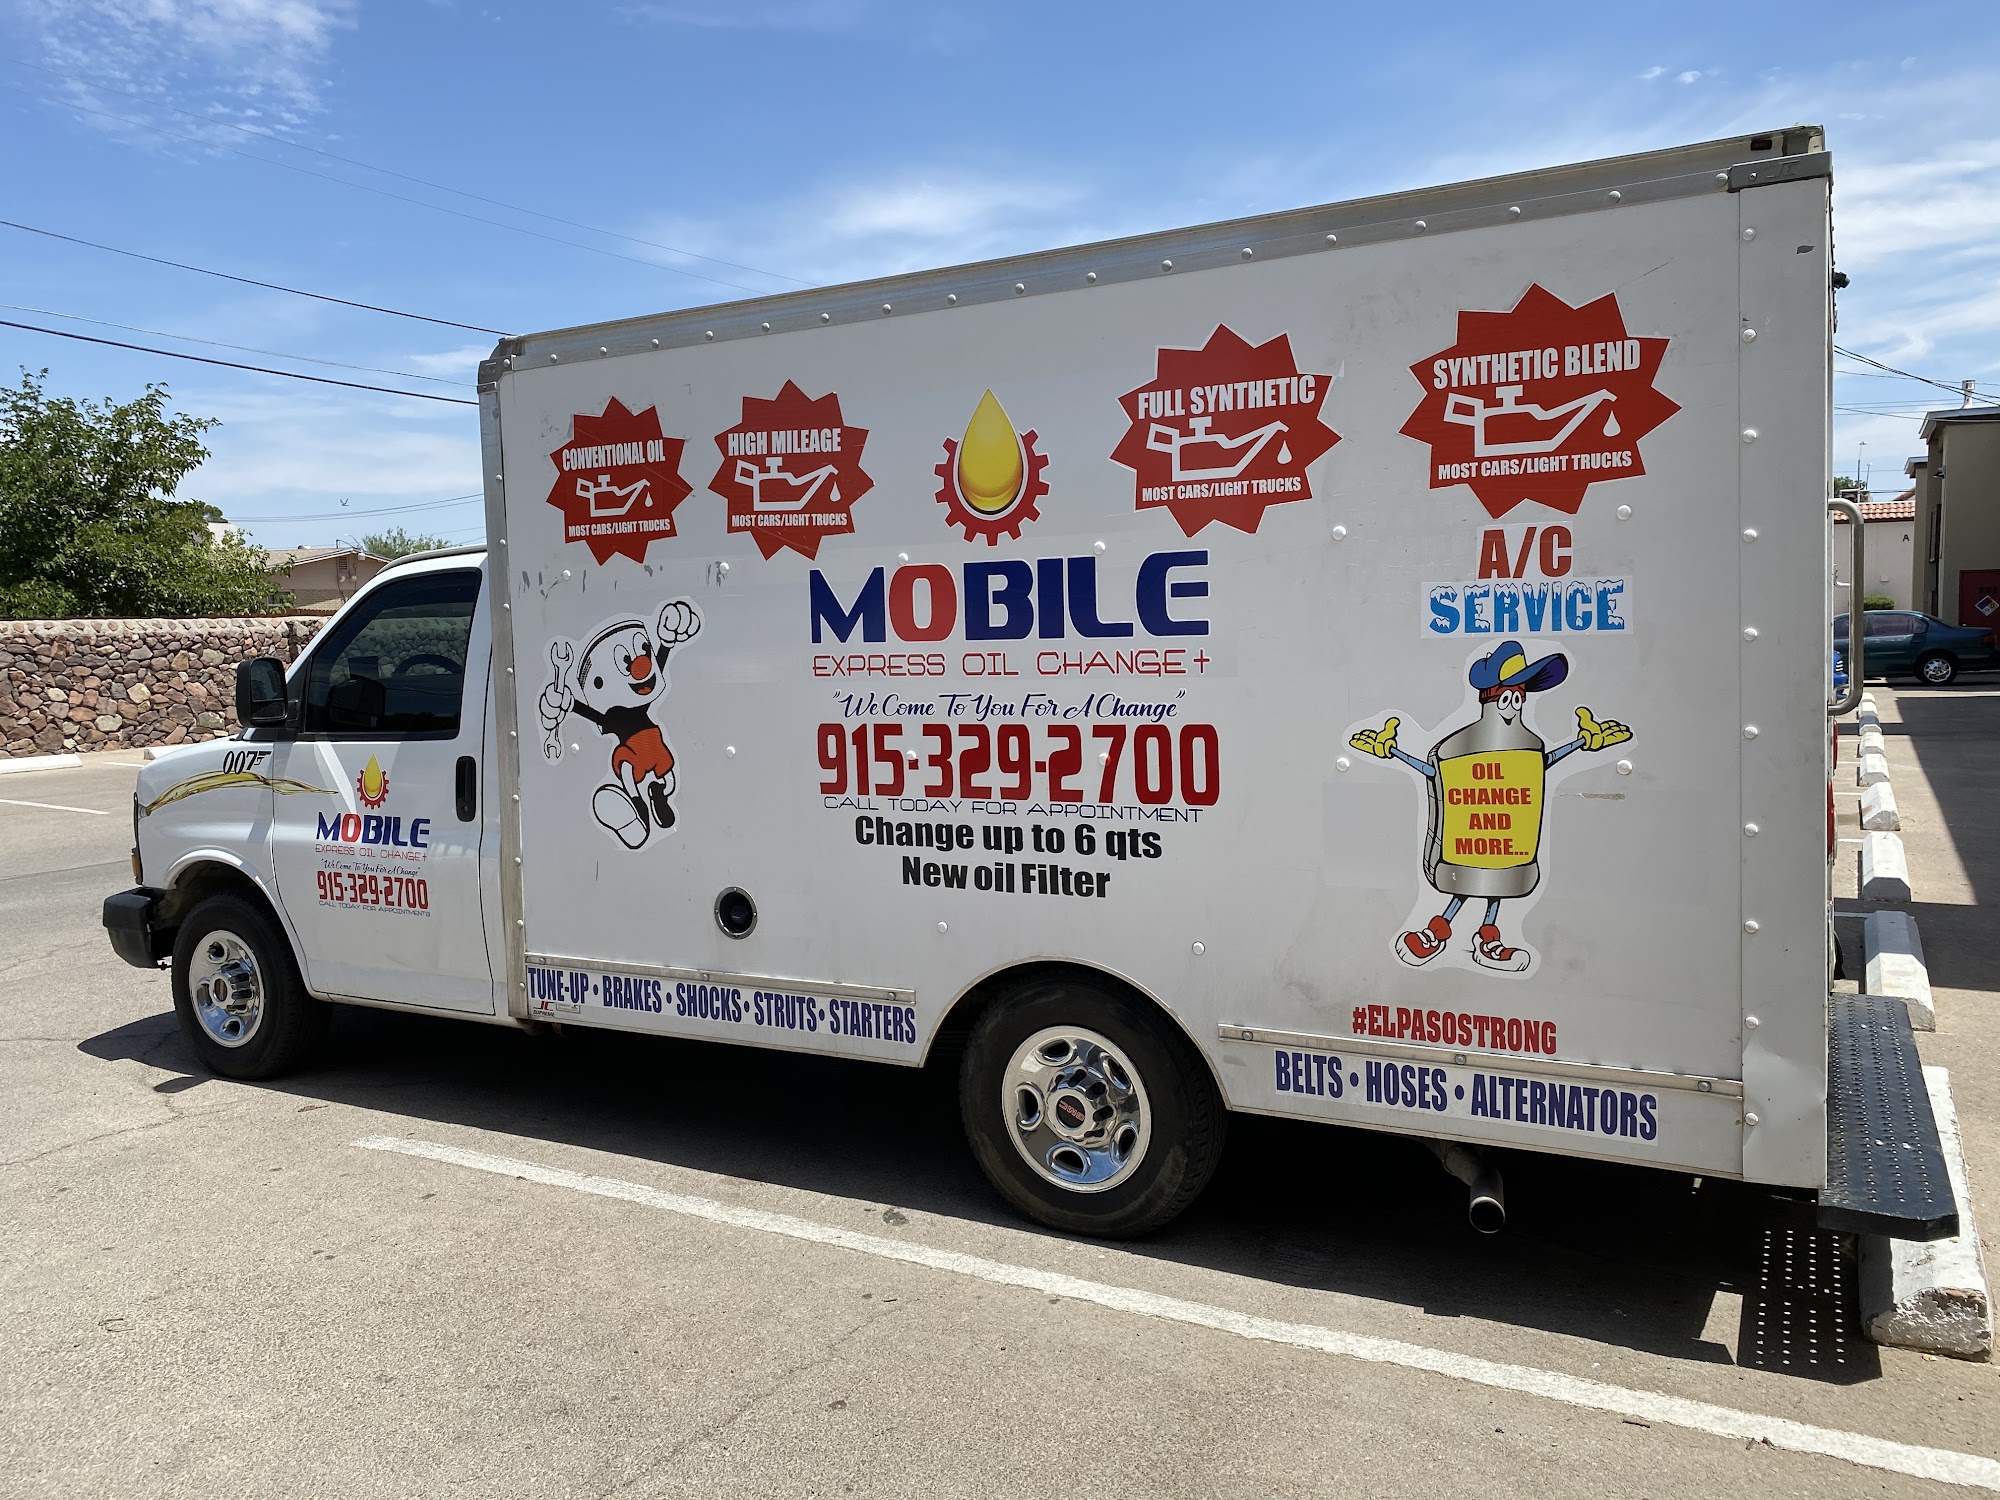 Mobile Express Oil Change +